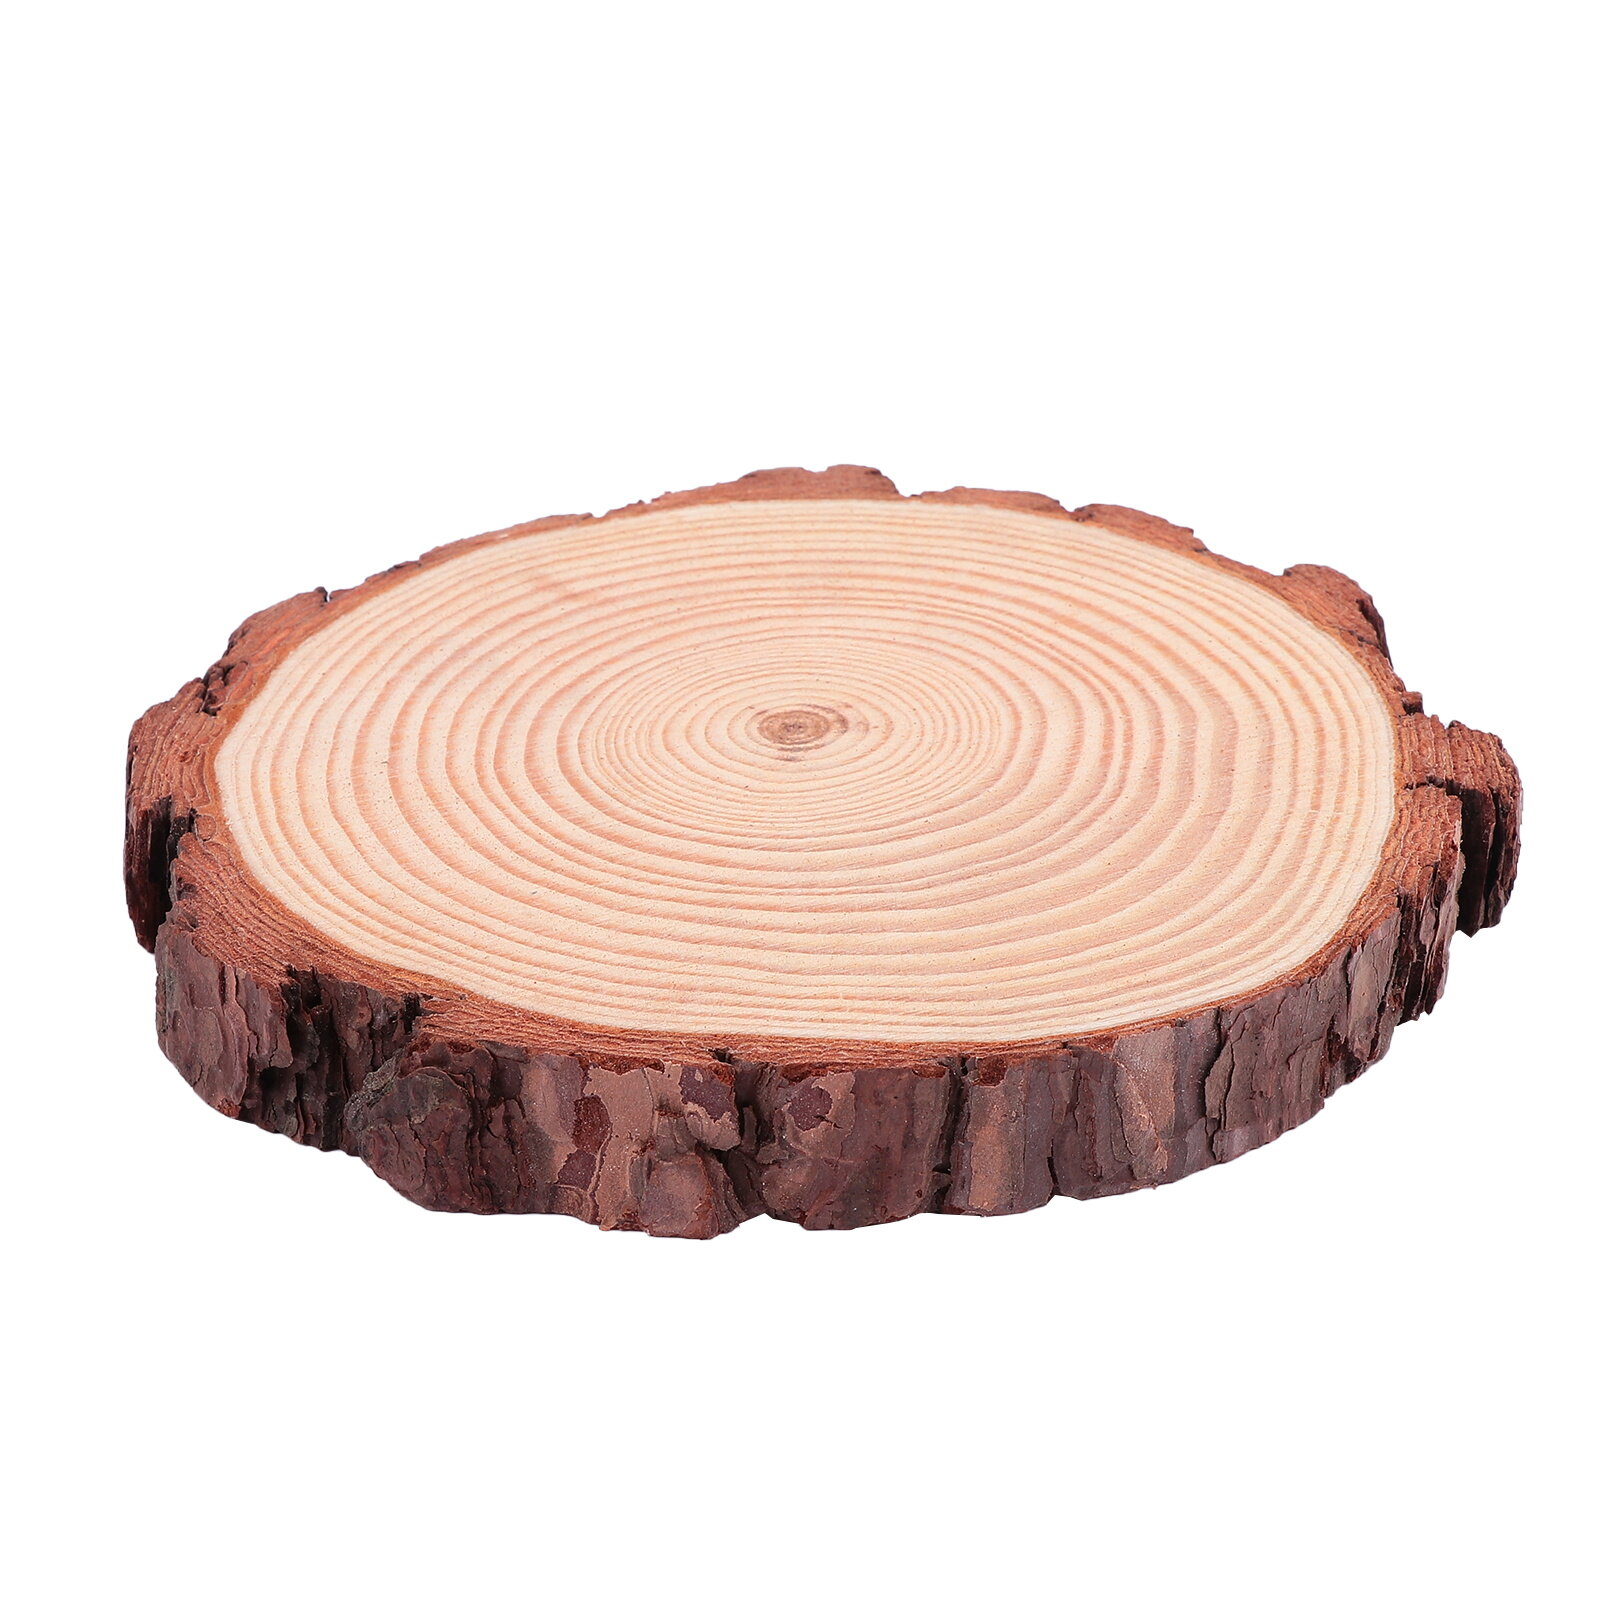 Unfinished Pine Slice Natural Wood Slices Wood Disc with Tree Bark DIY Accessory, Size: 16x16x2CM